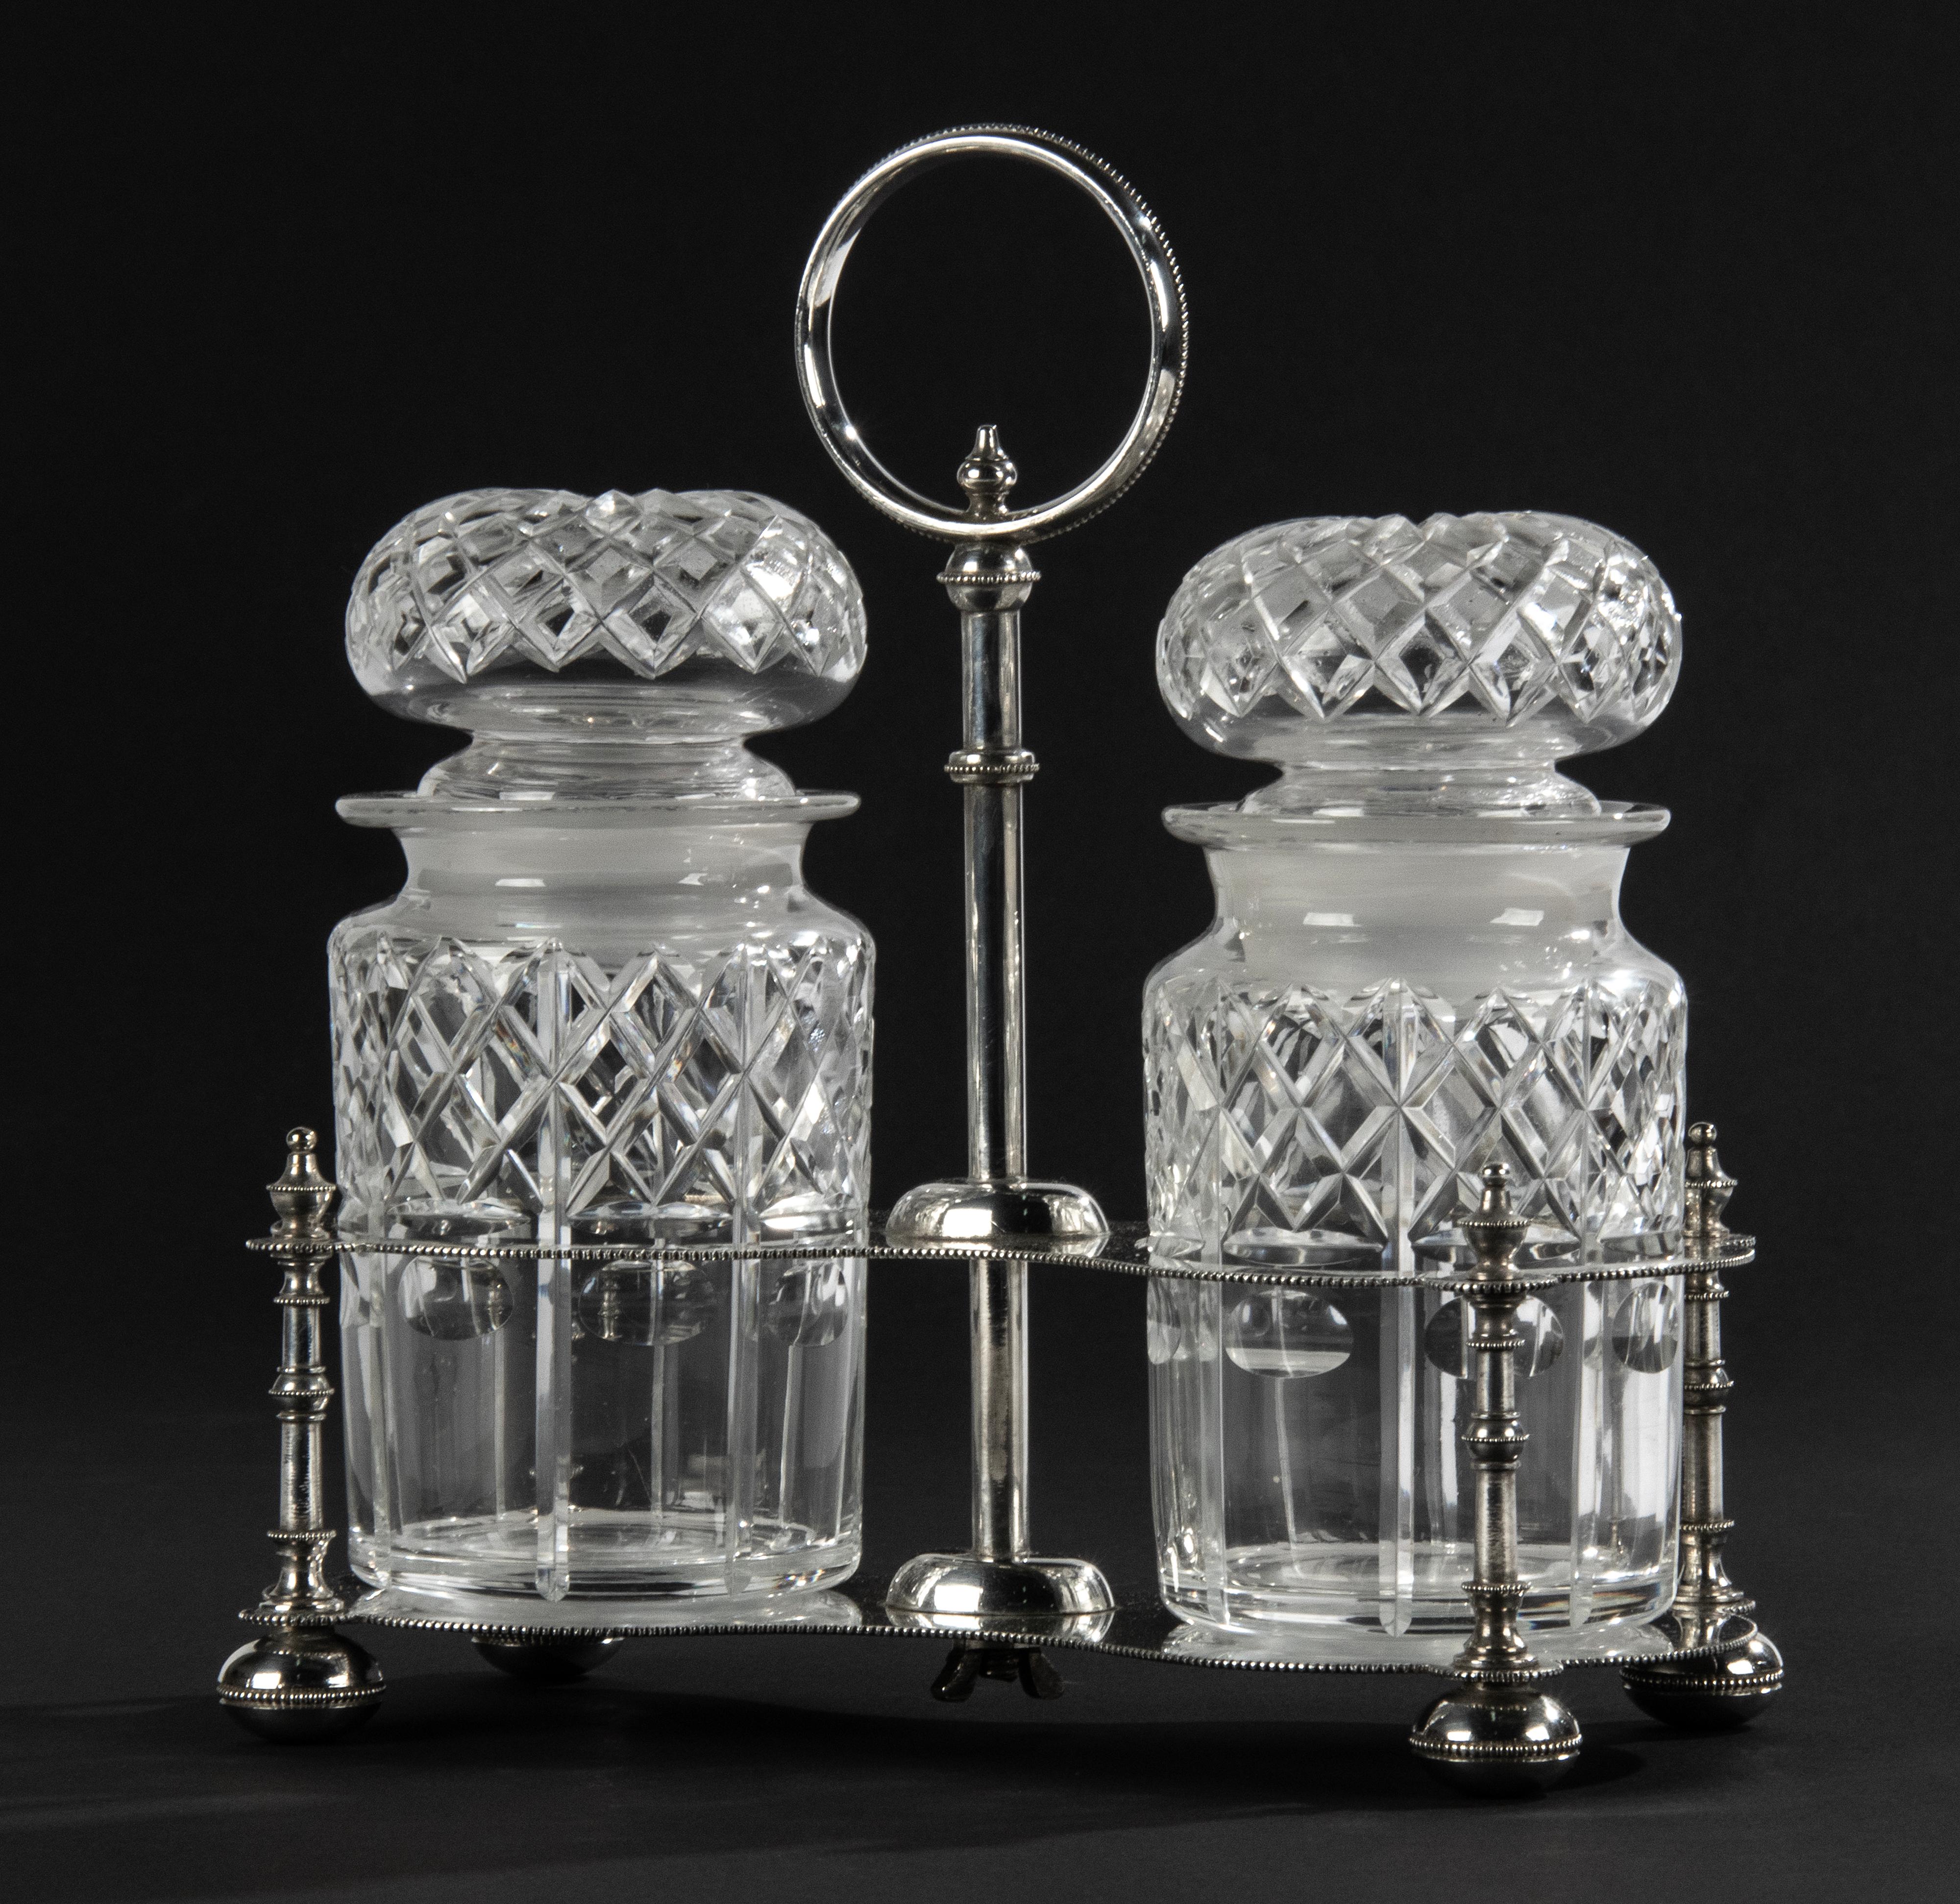 Beautiful silver plated server for pickles or jam.
The stand is made of Sheffield plate, with markings on the bottom. The crystal pots are beautifully decorated with fantasy carvings. The pots are 16 cm tall and Ø8 cm.
The whole is in good and